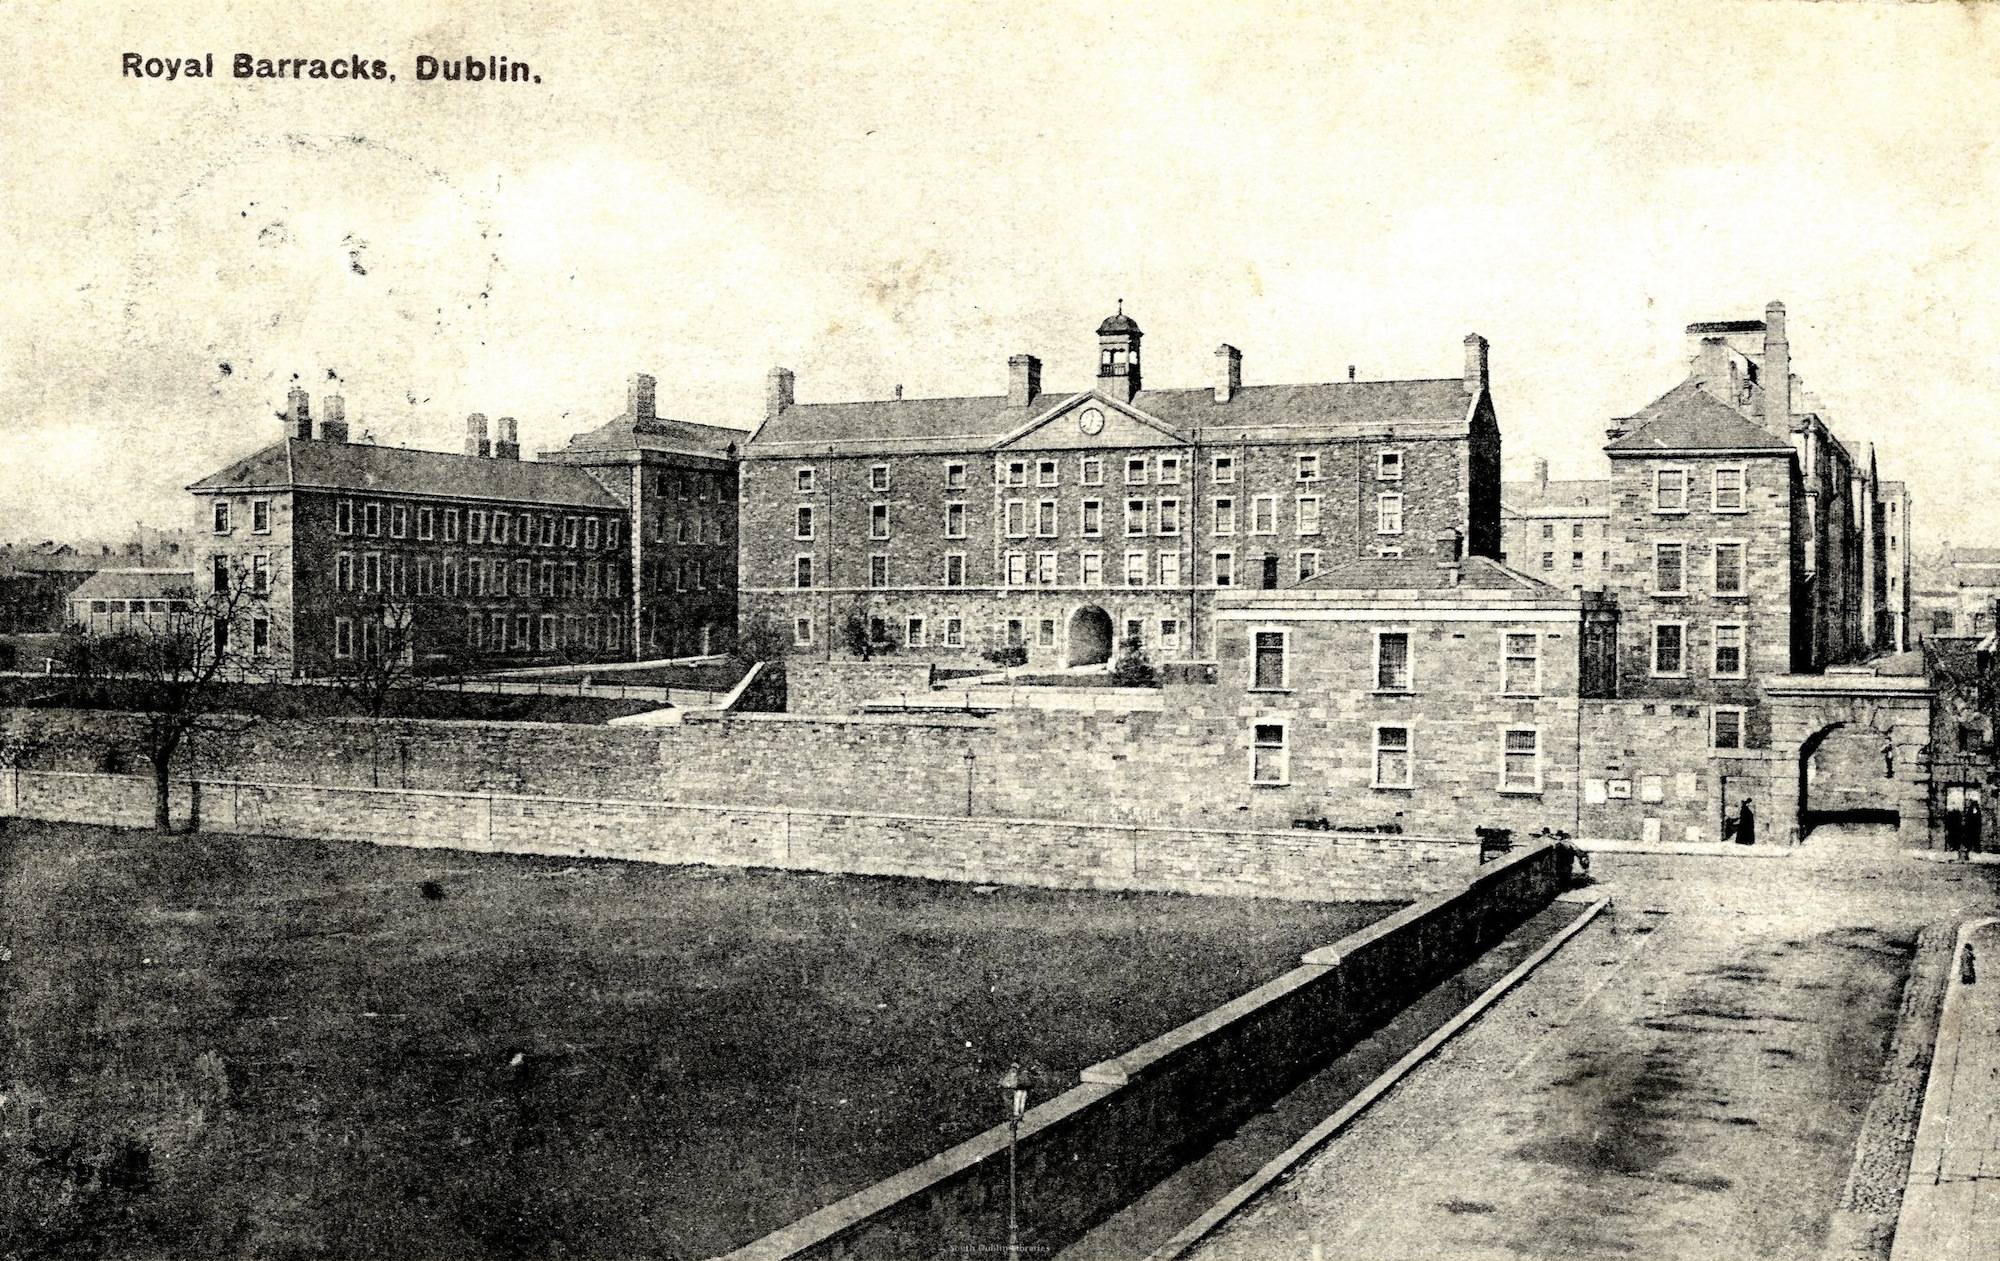 In 1902 the Royal Barracks (now Collins Barracks) acquired land for a military cemetery for the large force housed there. Courtesy of South Dublin County Libraries.